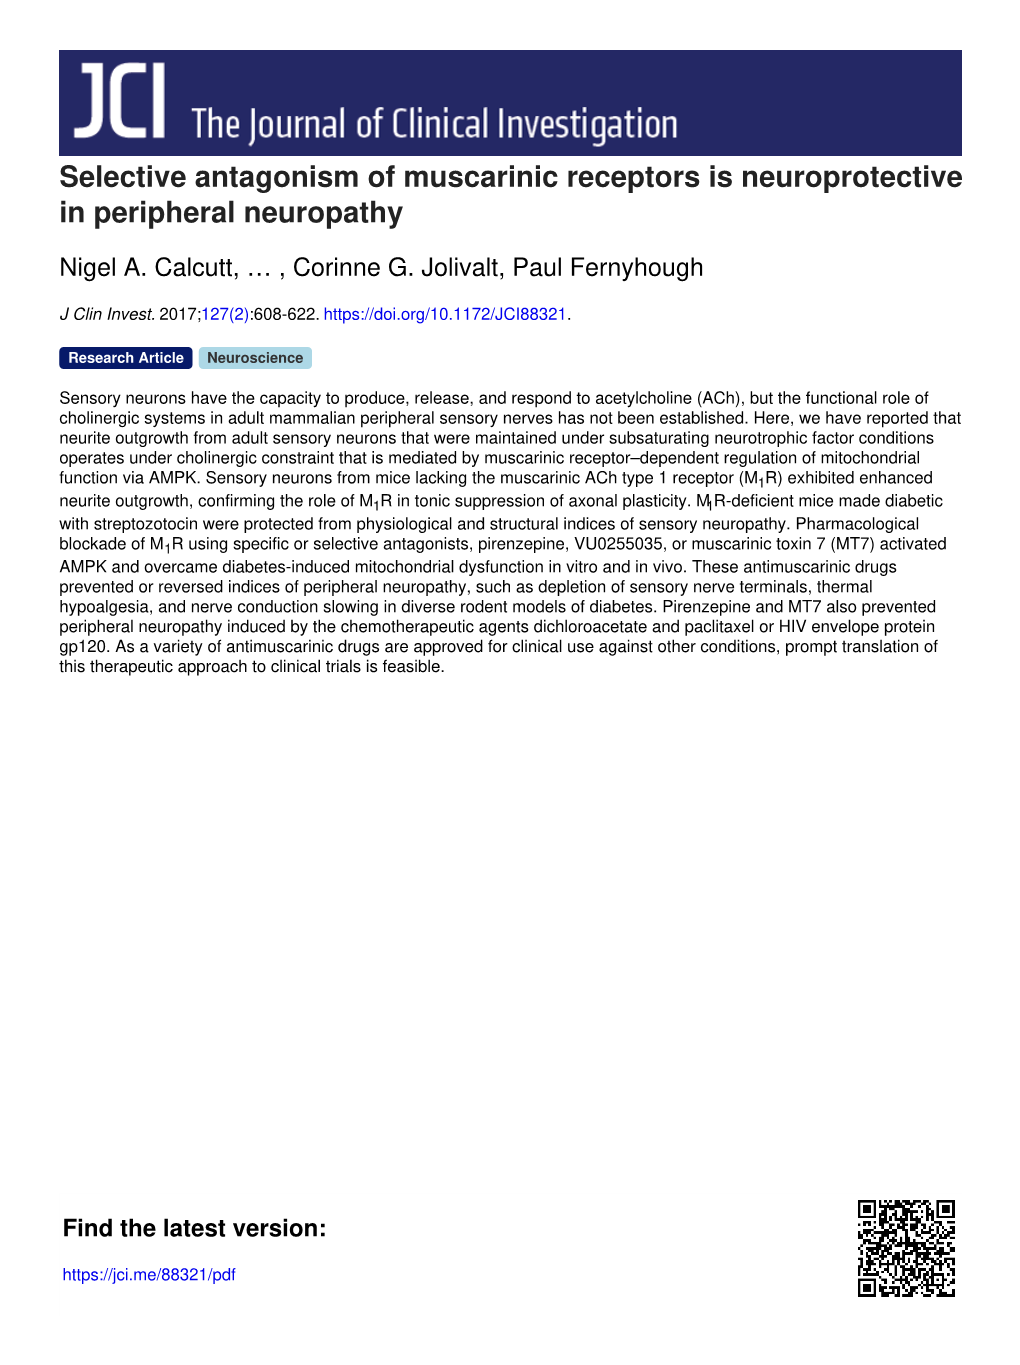 Selective Antagonism of Muscarinic Receptors Is Neuroprotective in Peripheral Neuropathy